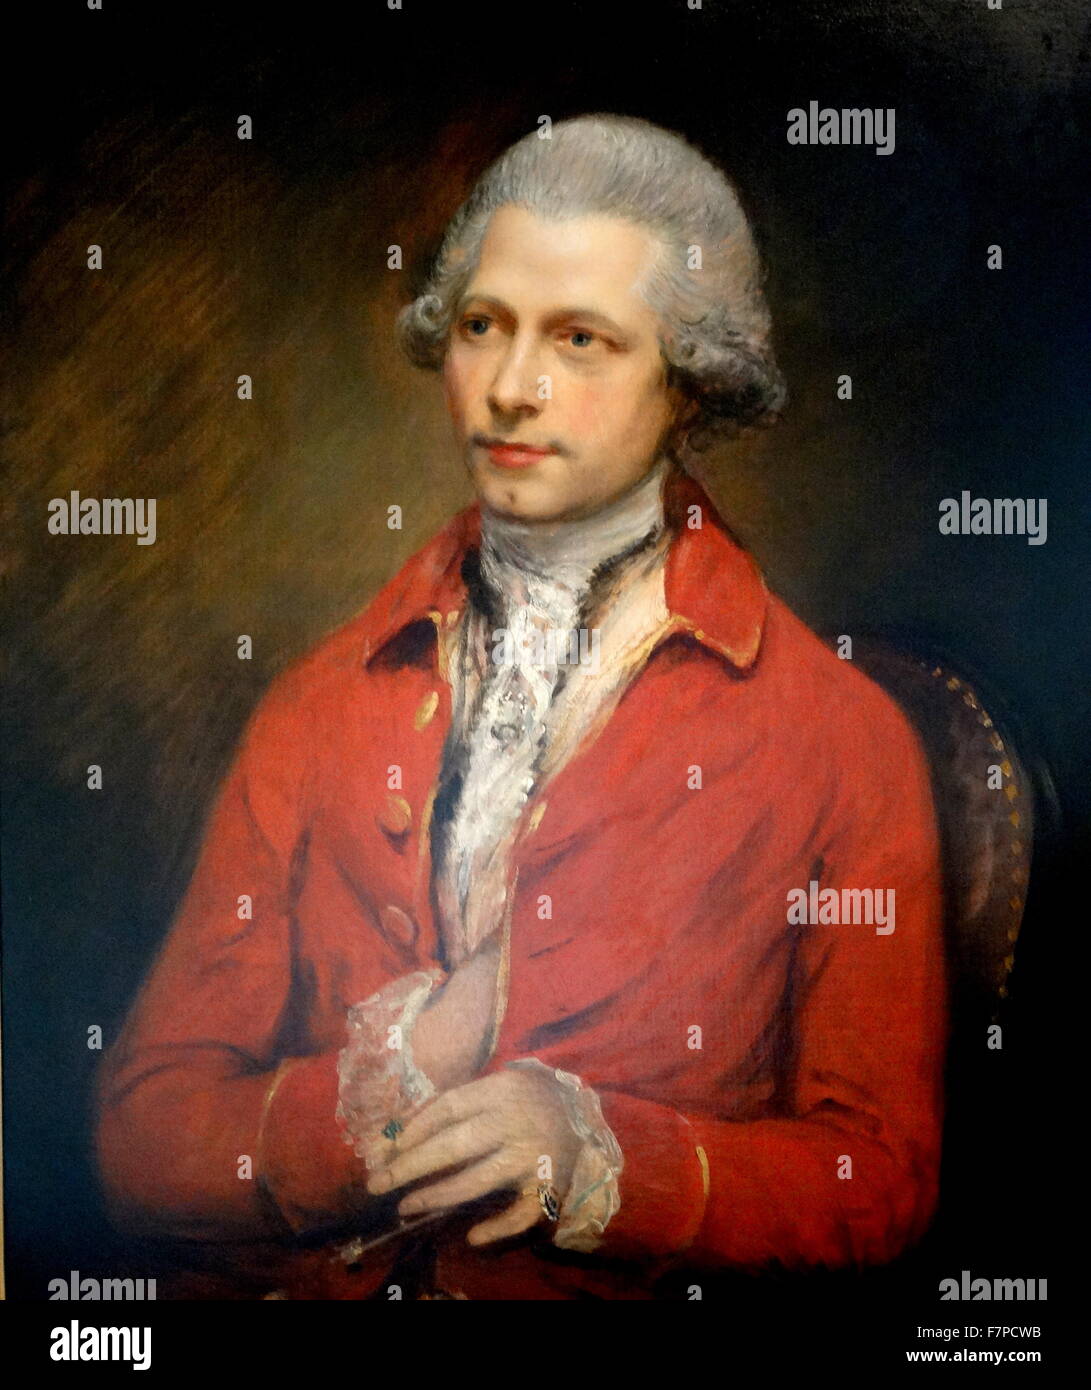 Portrait of John Joseph Merlin by Thomas Gainsborough (1727-1788) English portrait and landscape painter, draughtsman, and printmaker. Dated 18th Century Stock Photo